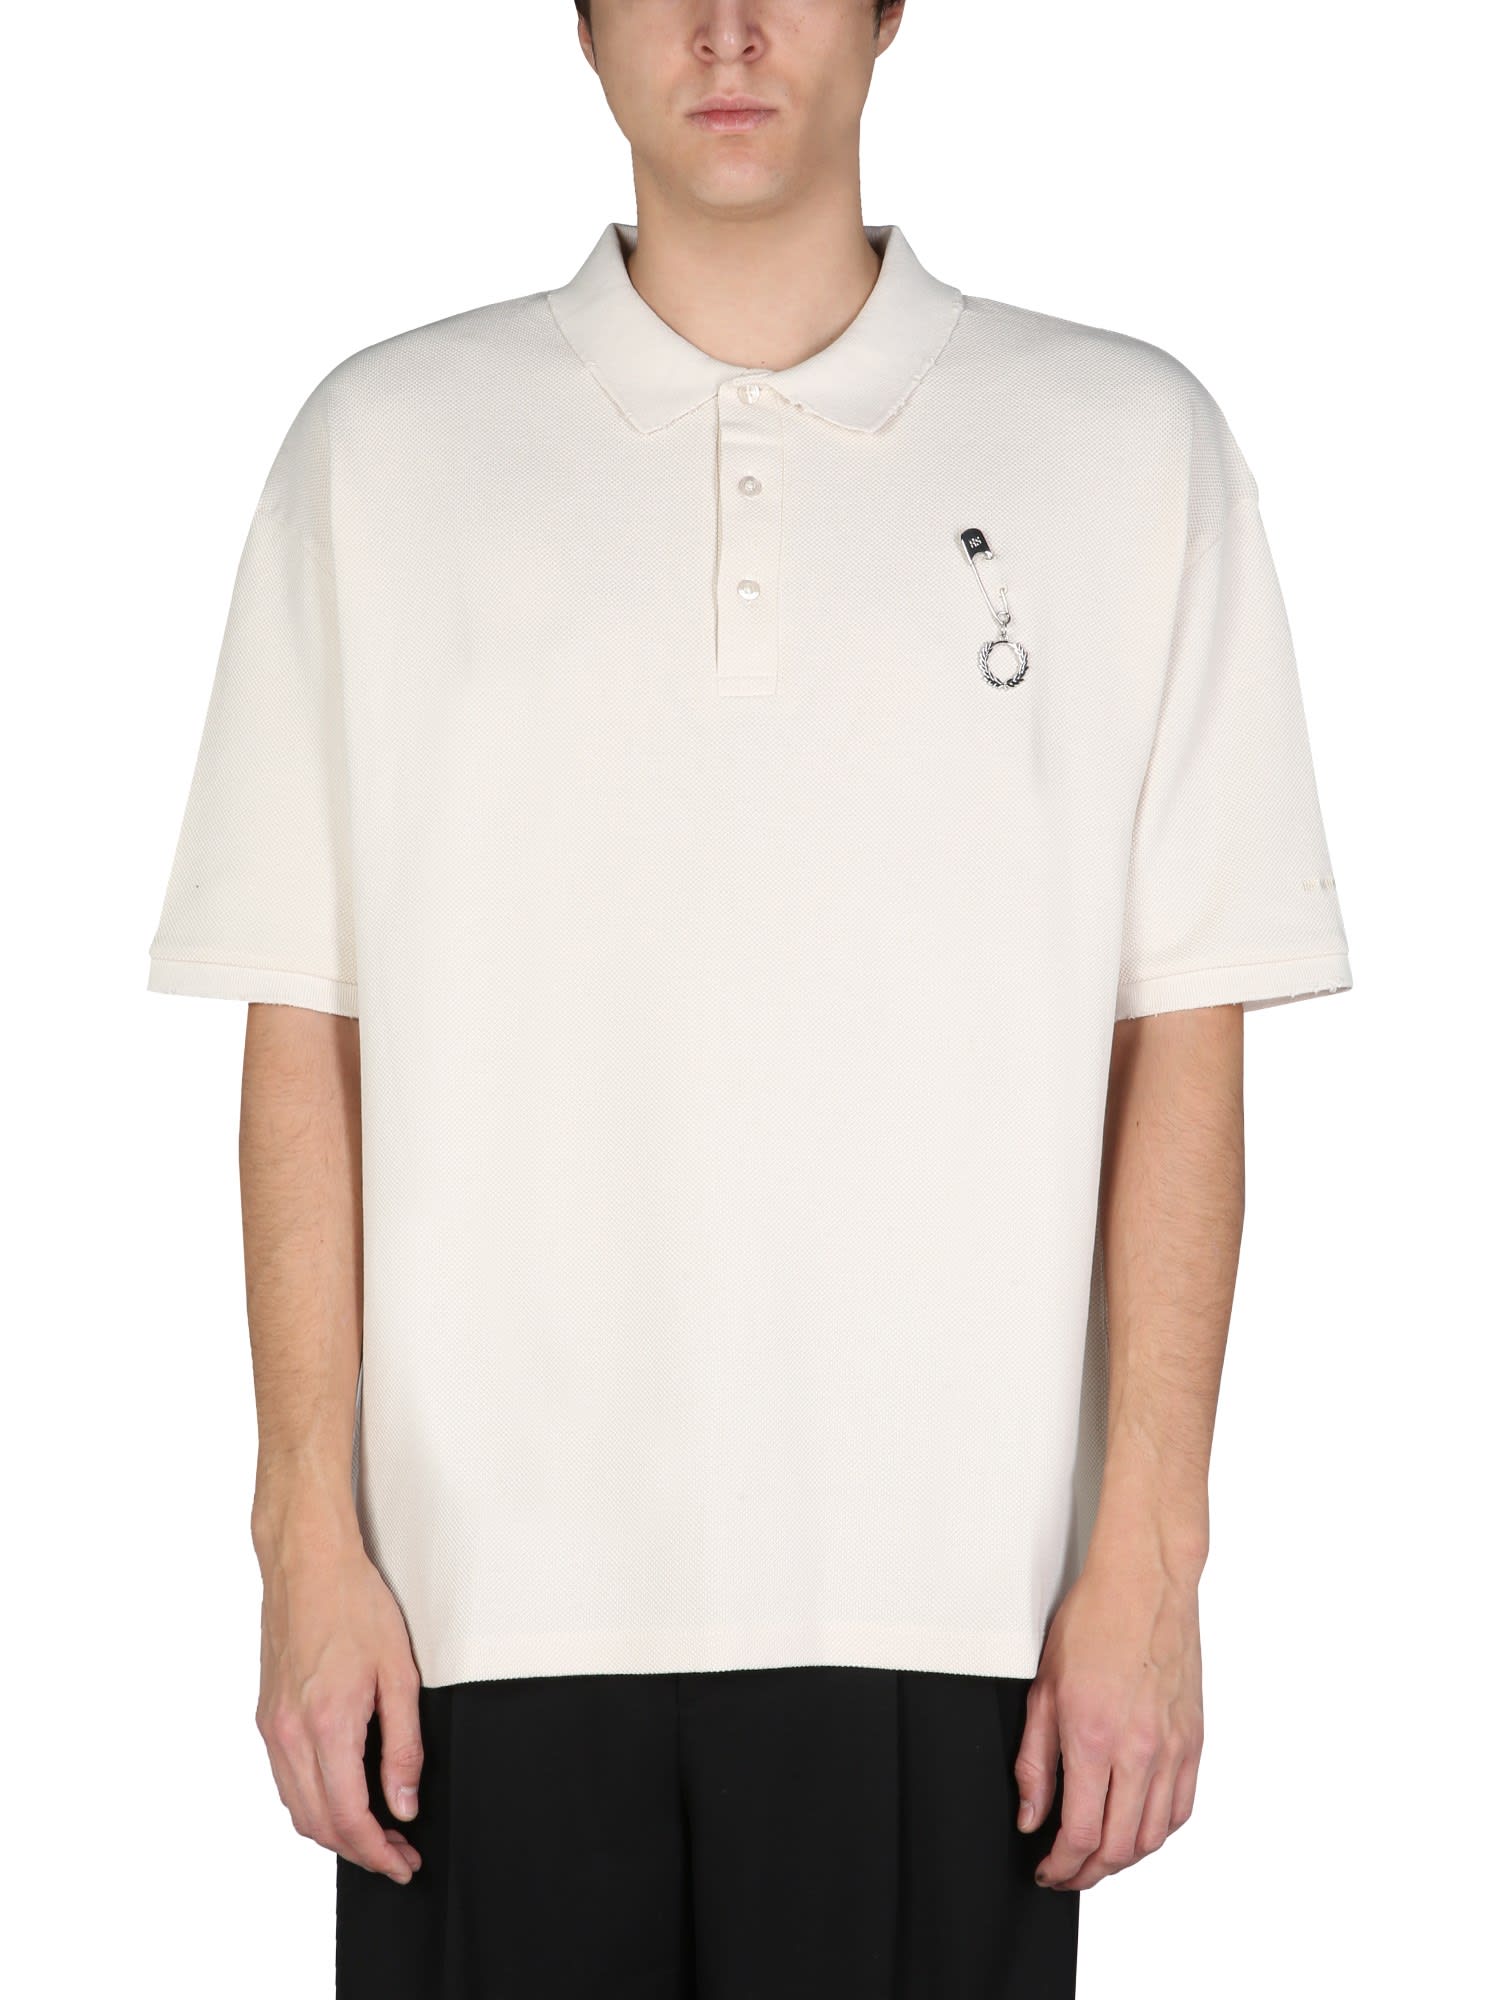 Fred Perry by Raf Simons Distressed Oversized Polo Shirt